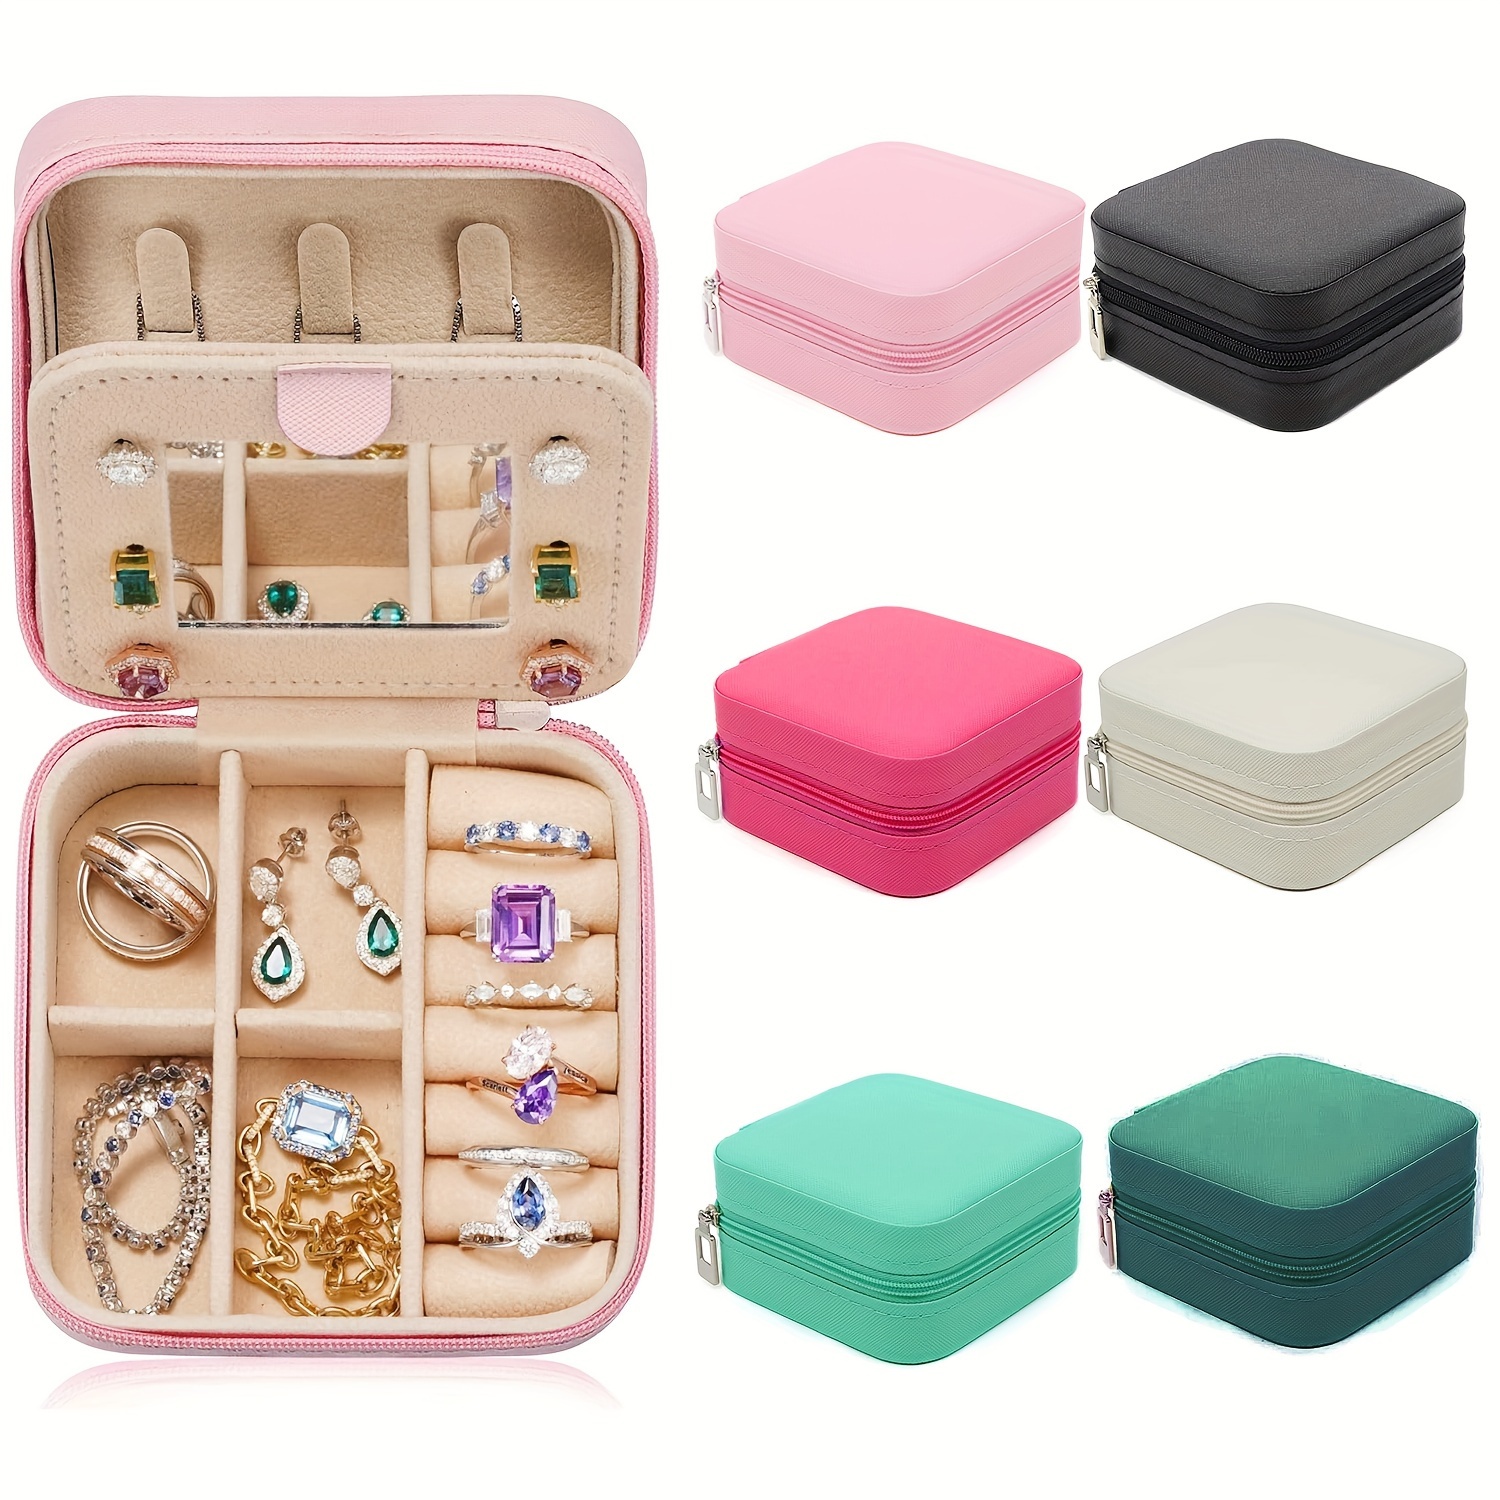 

Travel Jewelry Organizer Box, Storage Case With Mirror, Mini Pu Leather Elegant Holder Boxes For Earrings, Rings, Necklaces, Gifts For Women, Mother